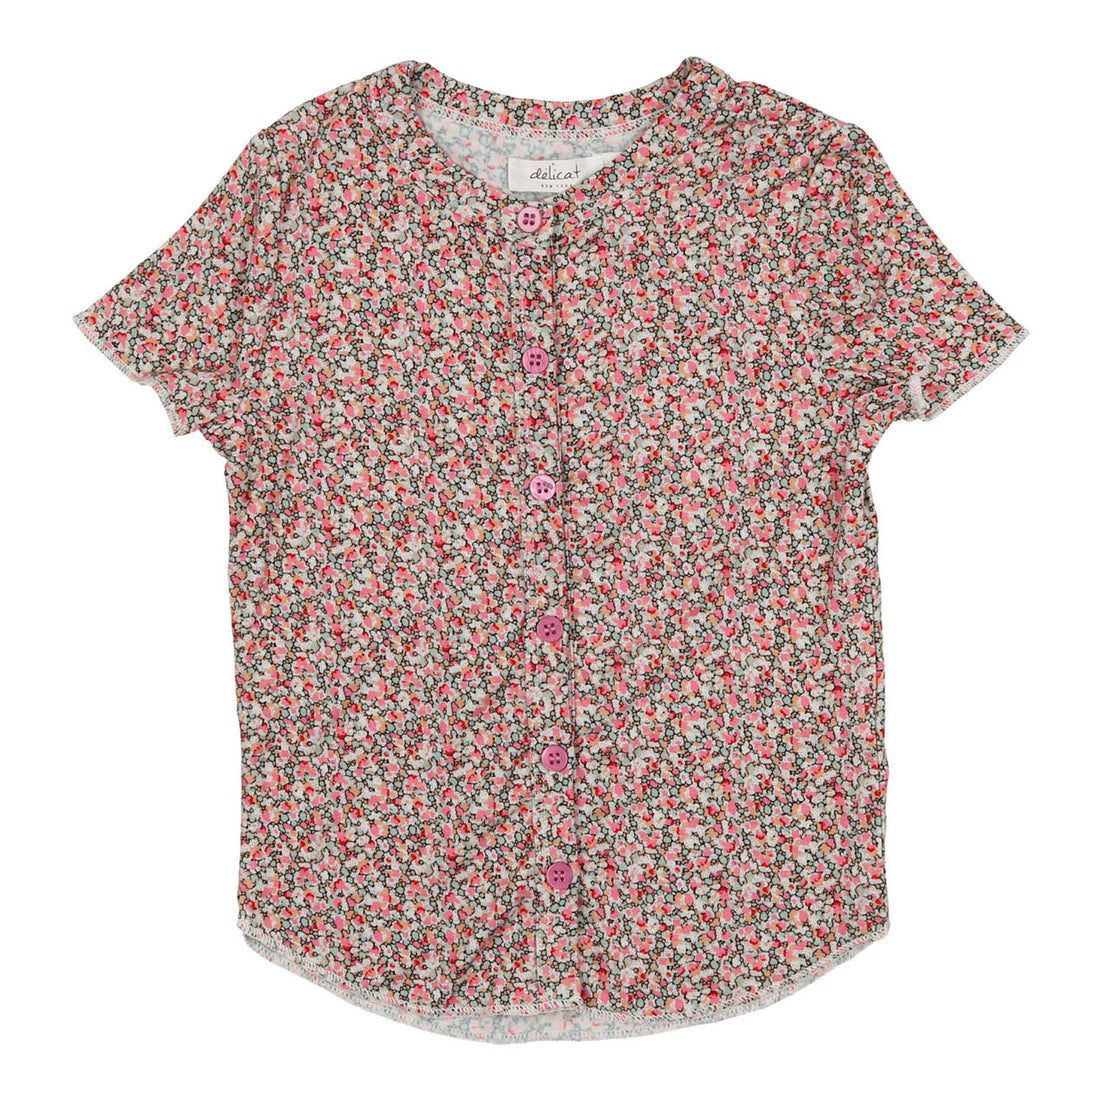 Delicat Red Mini Floral Print Short Sleeve Button Down Tee